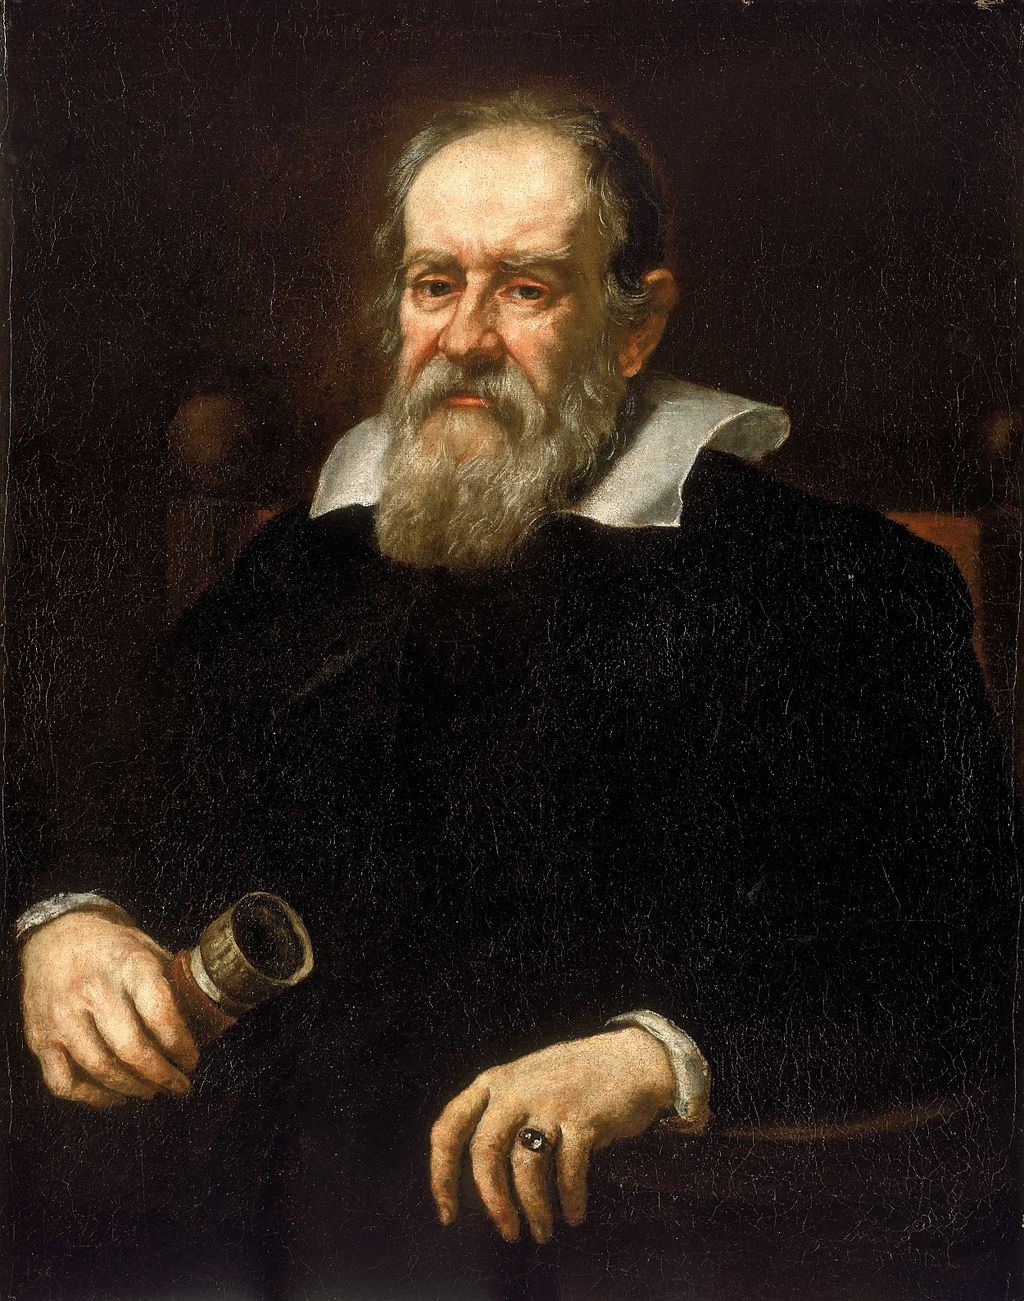 Galileo's fingers, before their removal. Justus Sustermans [Public domain or Public domain], via Wikimedia Commons